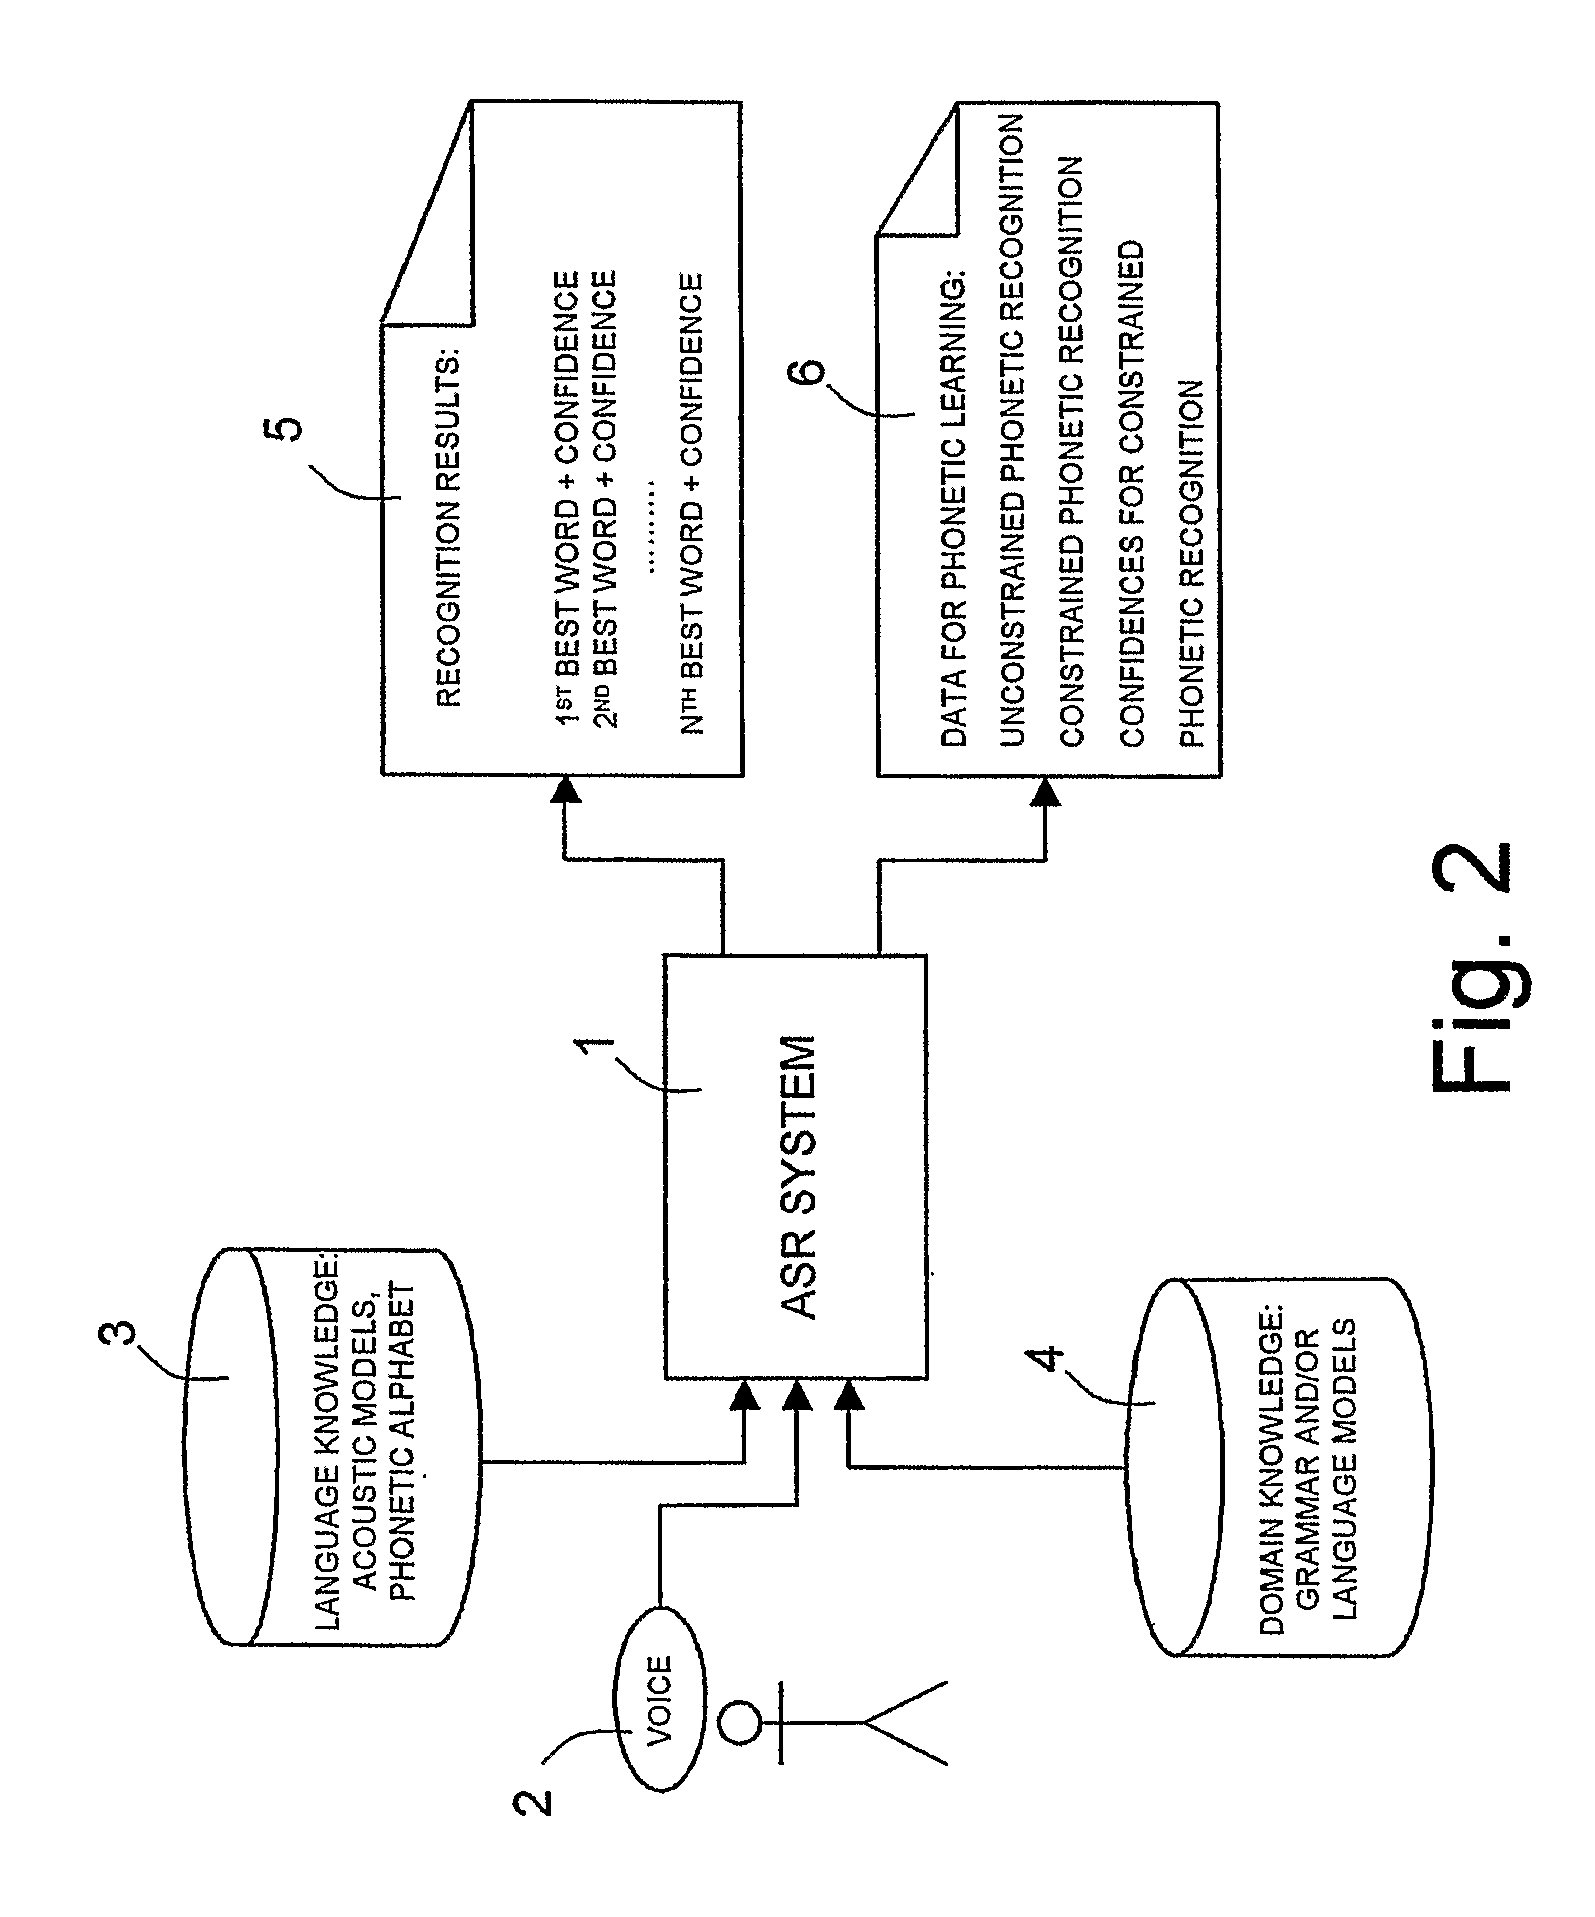 Method and System for Automatically Providing Linguistic Formulations that are Outside a Recognition Domain of an Automatic Speech Recognition System